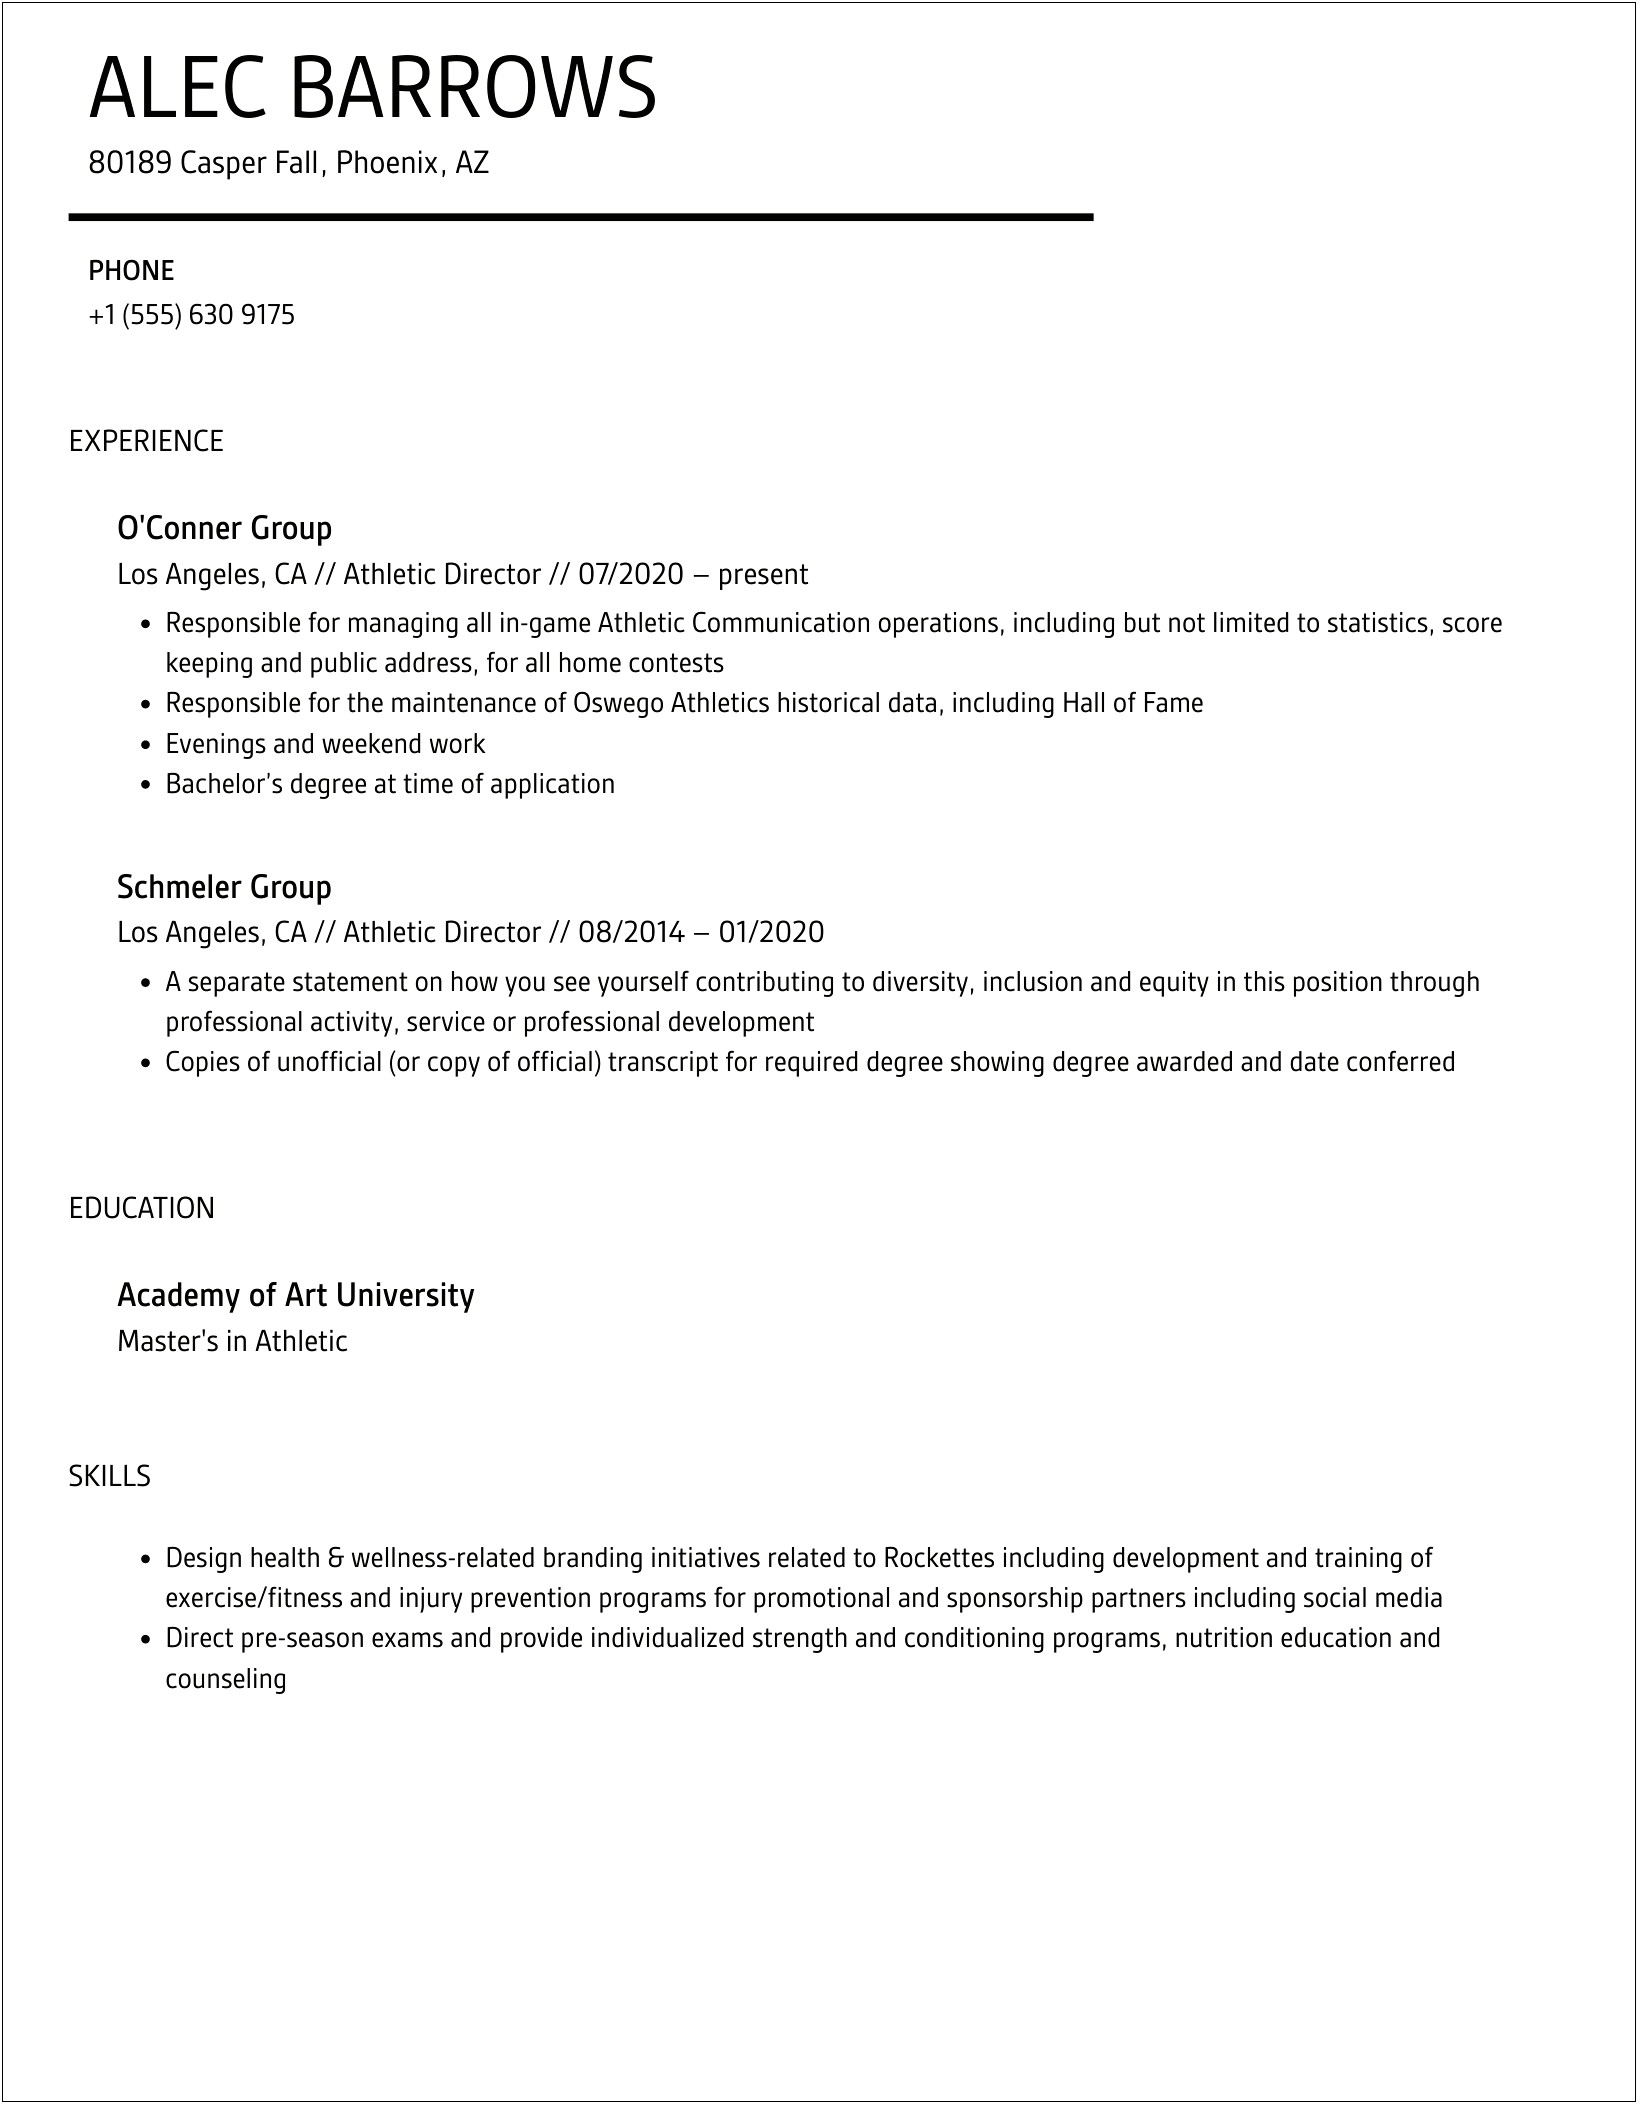 Generic Cover Letter For Athletic Director Resume